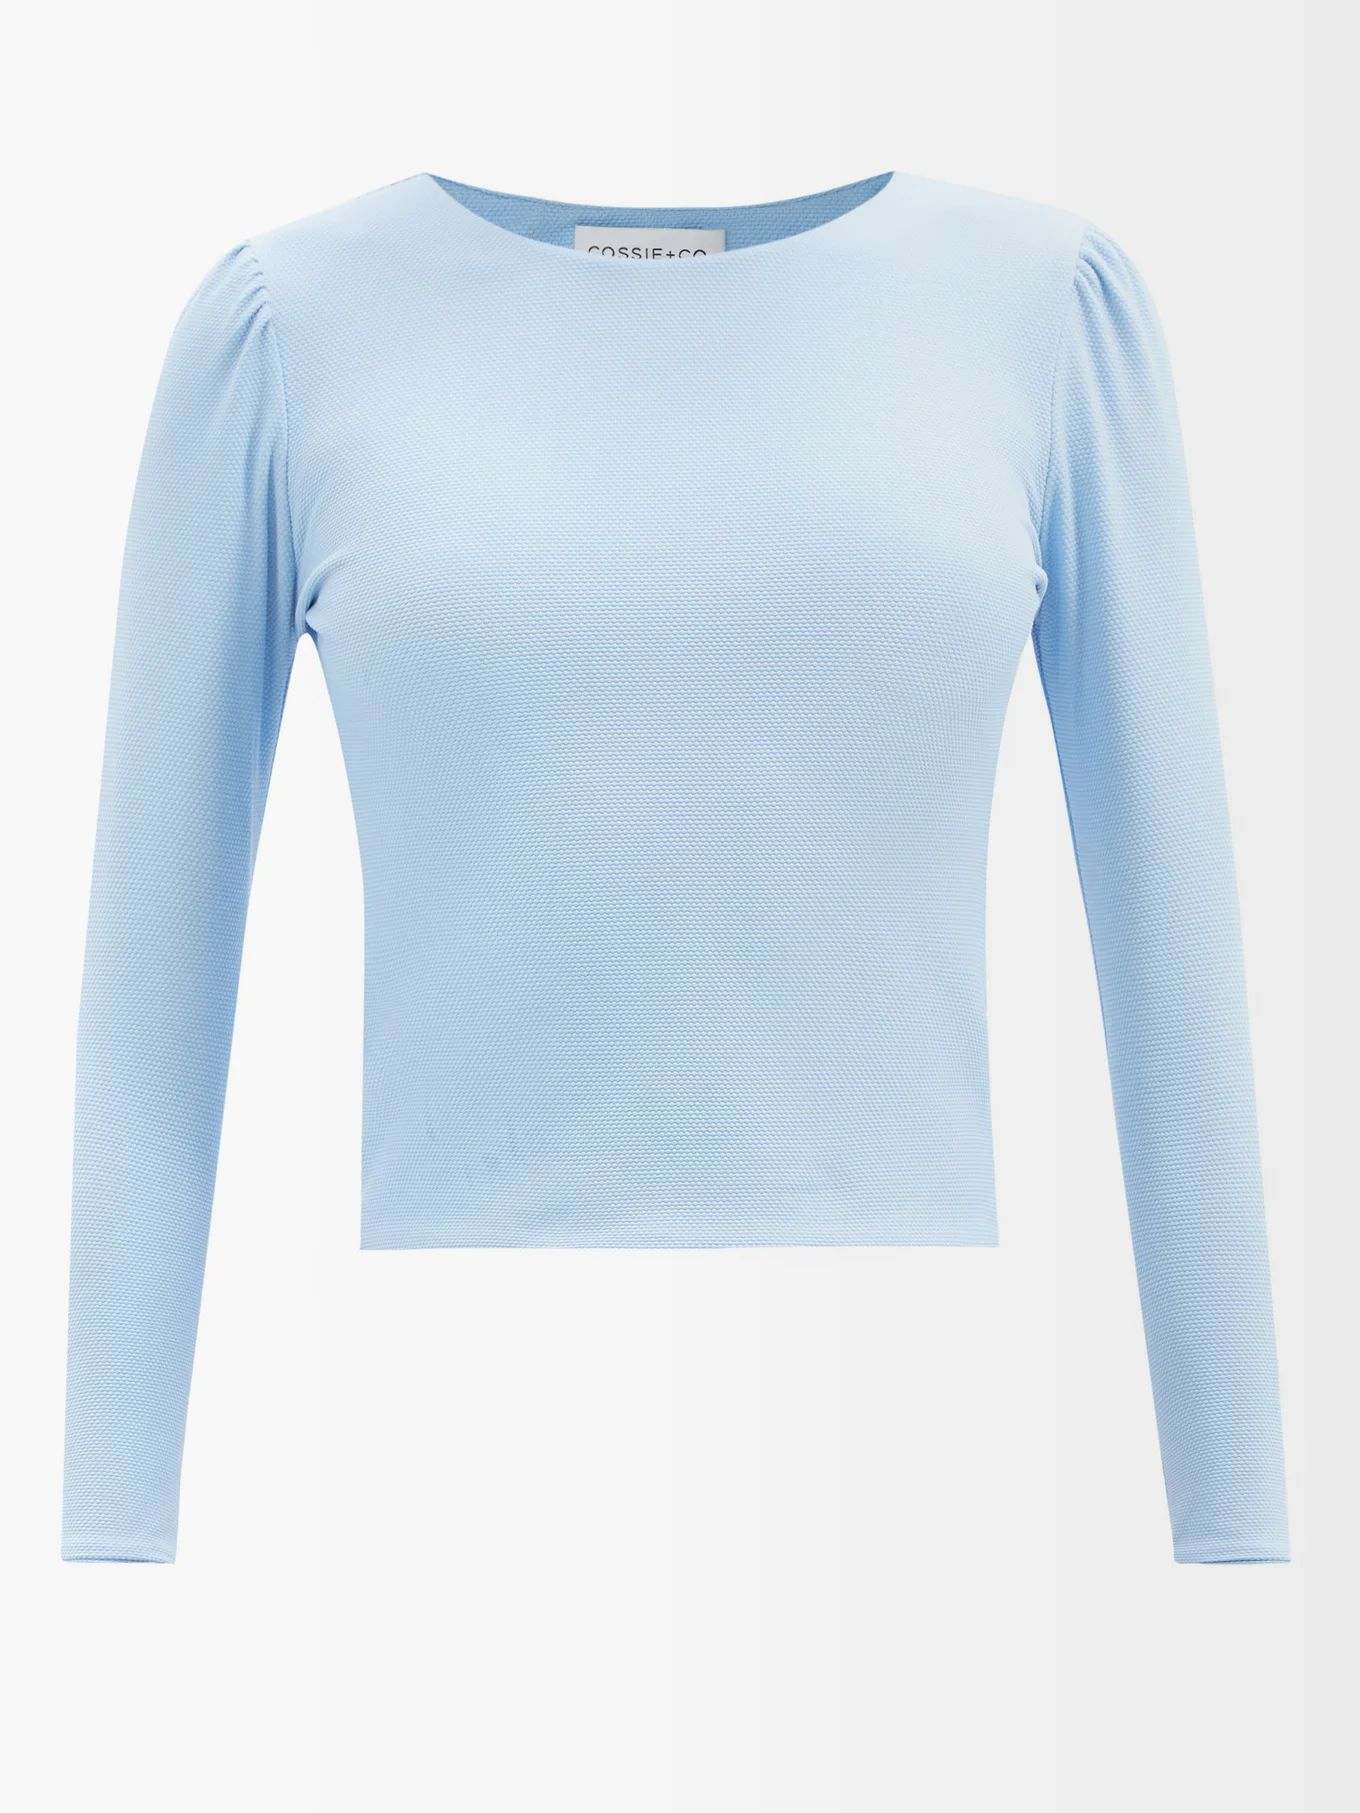 The Leigh long-sleeve rash guard | Cossie + Co | Matches (US)